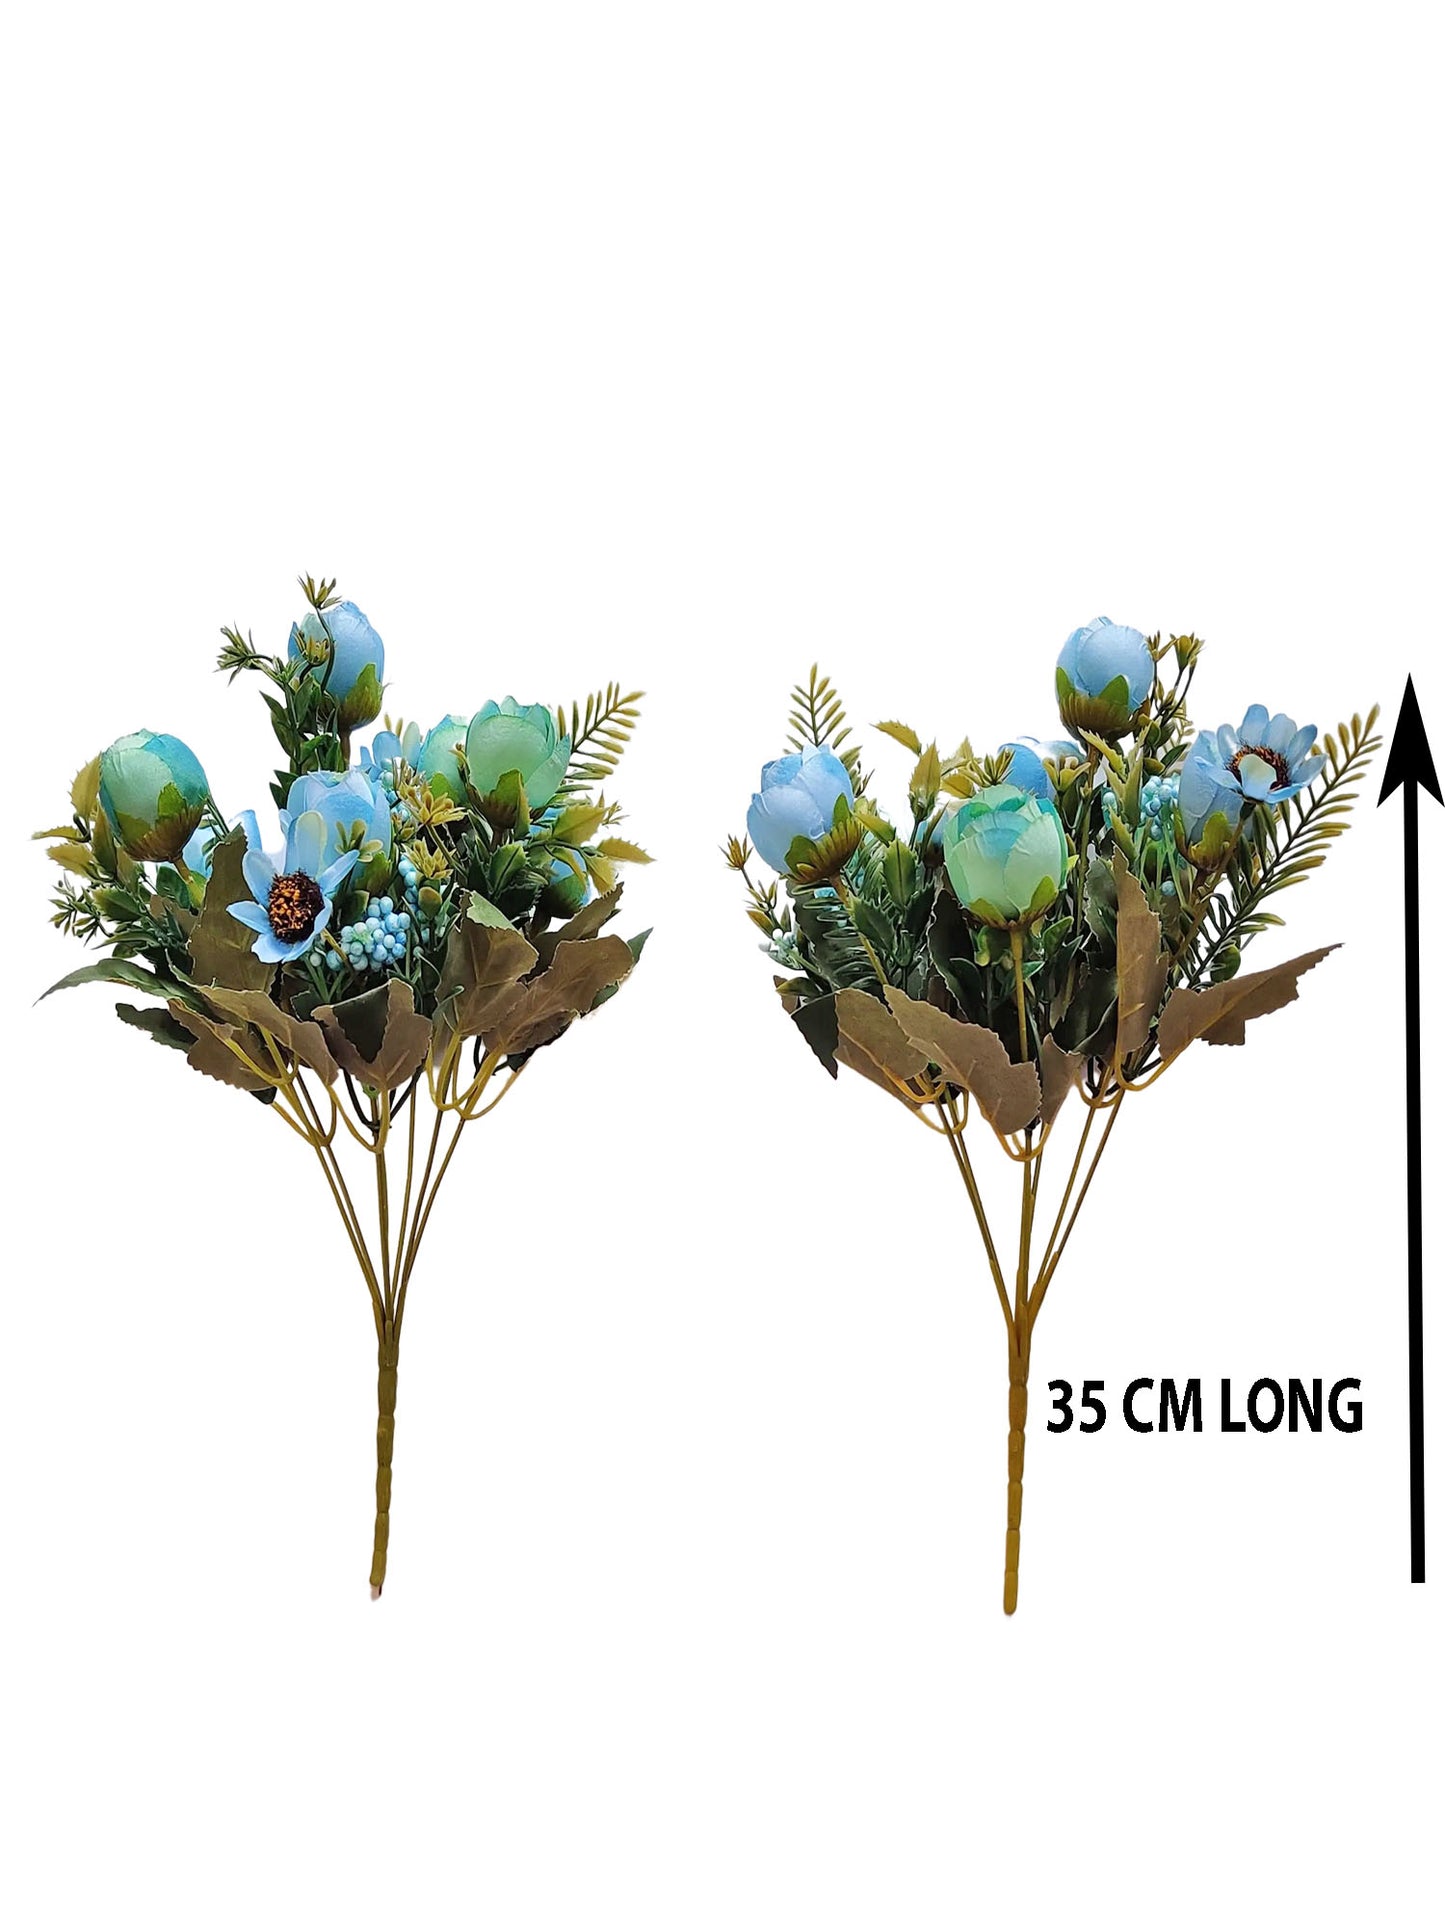 ARTSY® Artificial Flowers for home decoration dry peony Flower bunch For room decor, Office, for vase, pot filler, gifting, Craft, Without Vase, combo, Pack of 2 piece, 6 branches each, blue